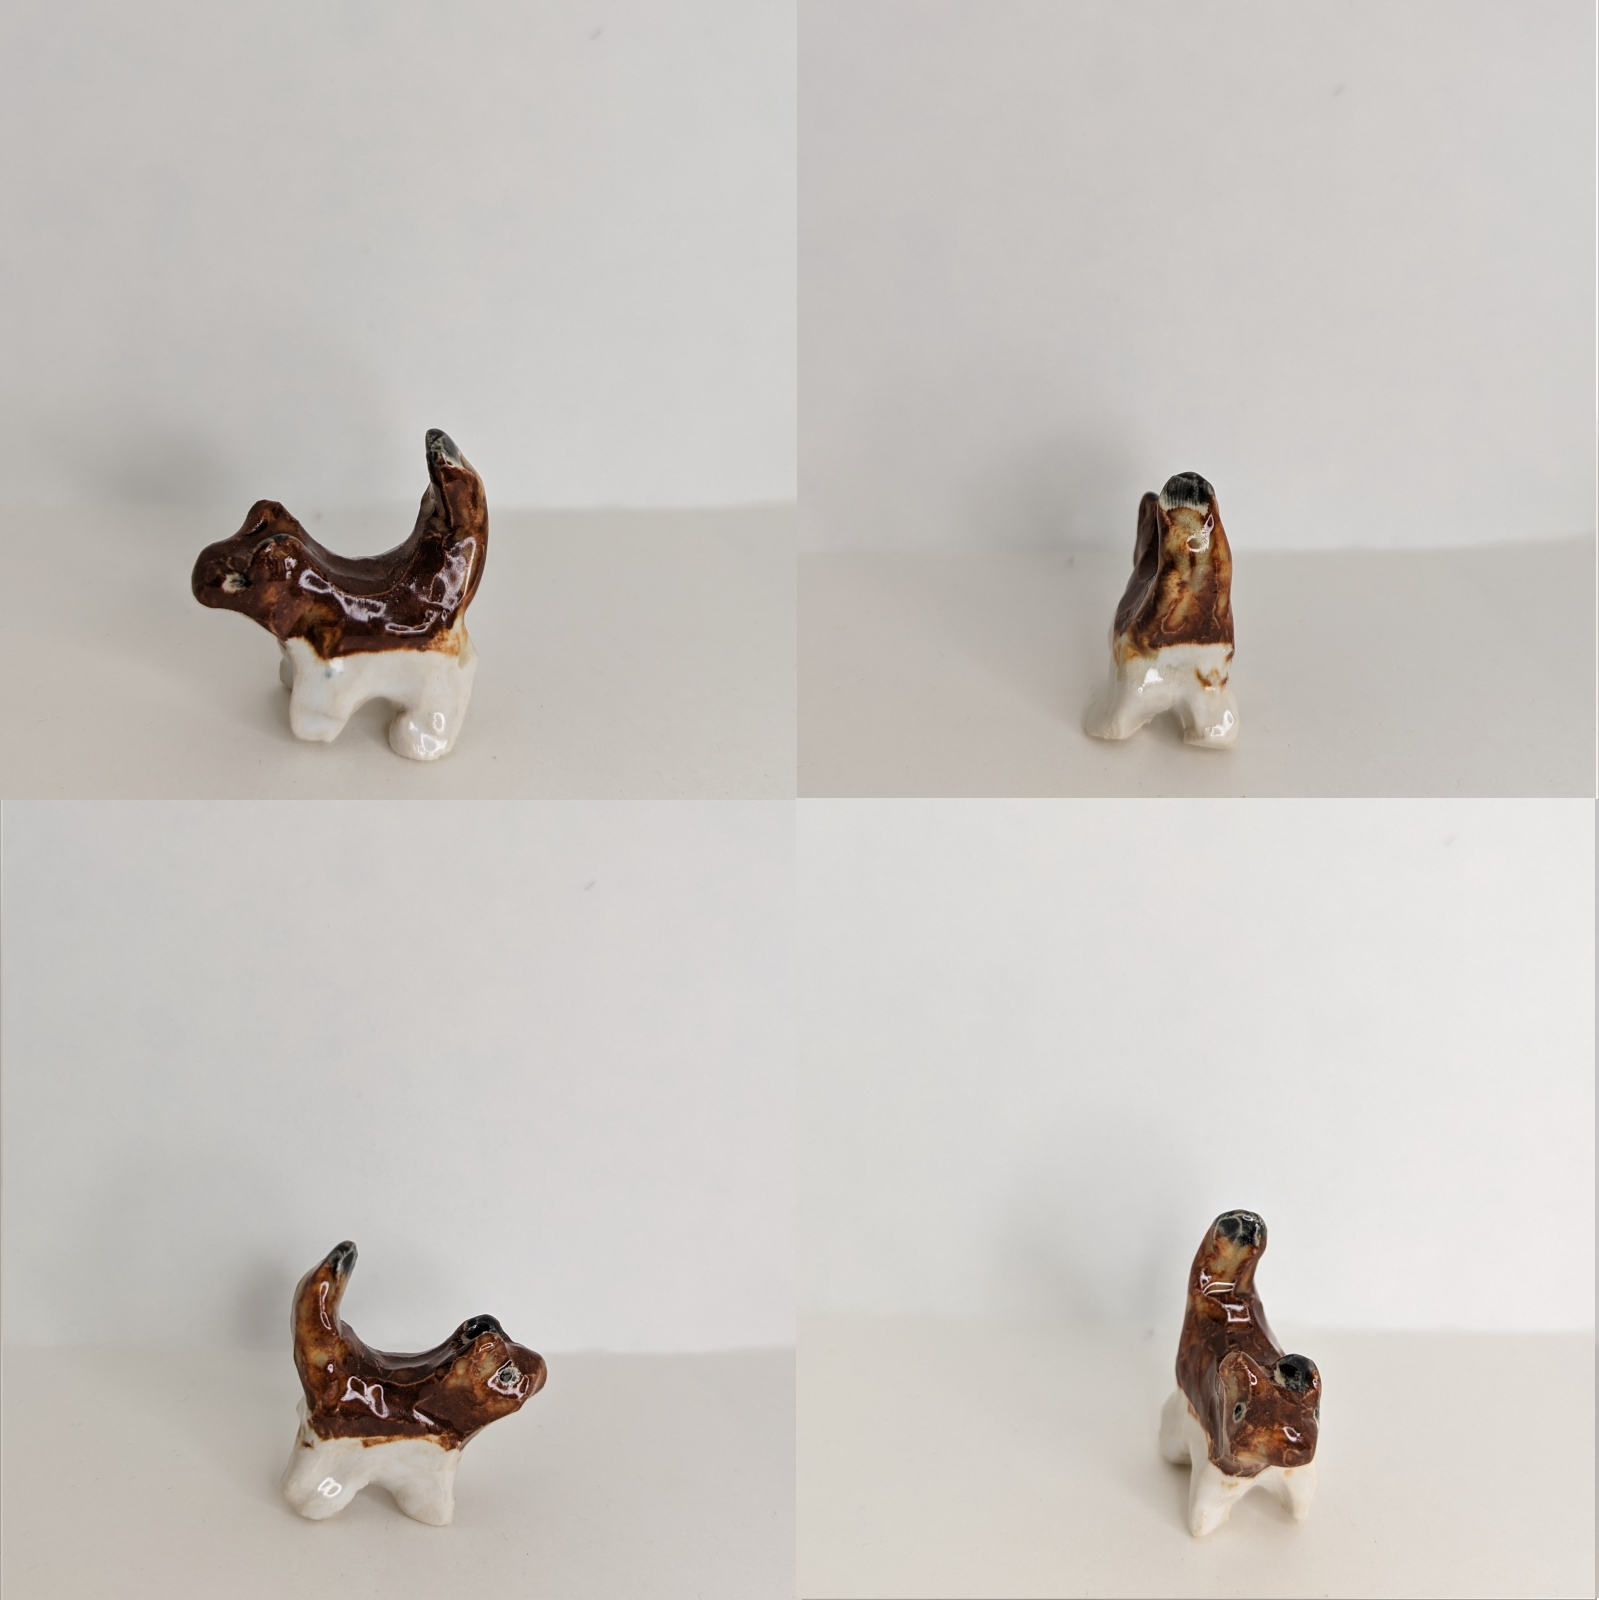 4 views of a small brown and white ceramic kitten.